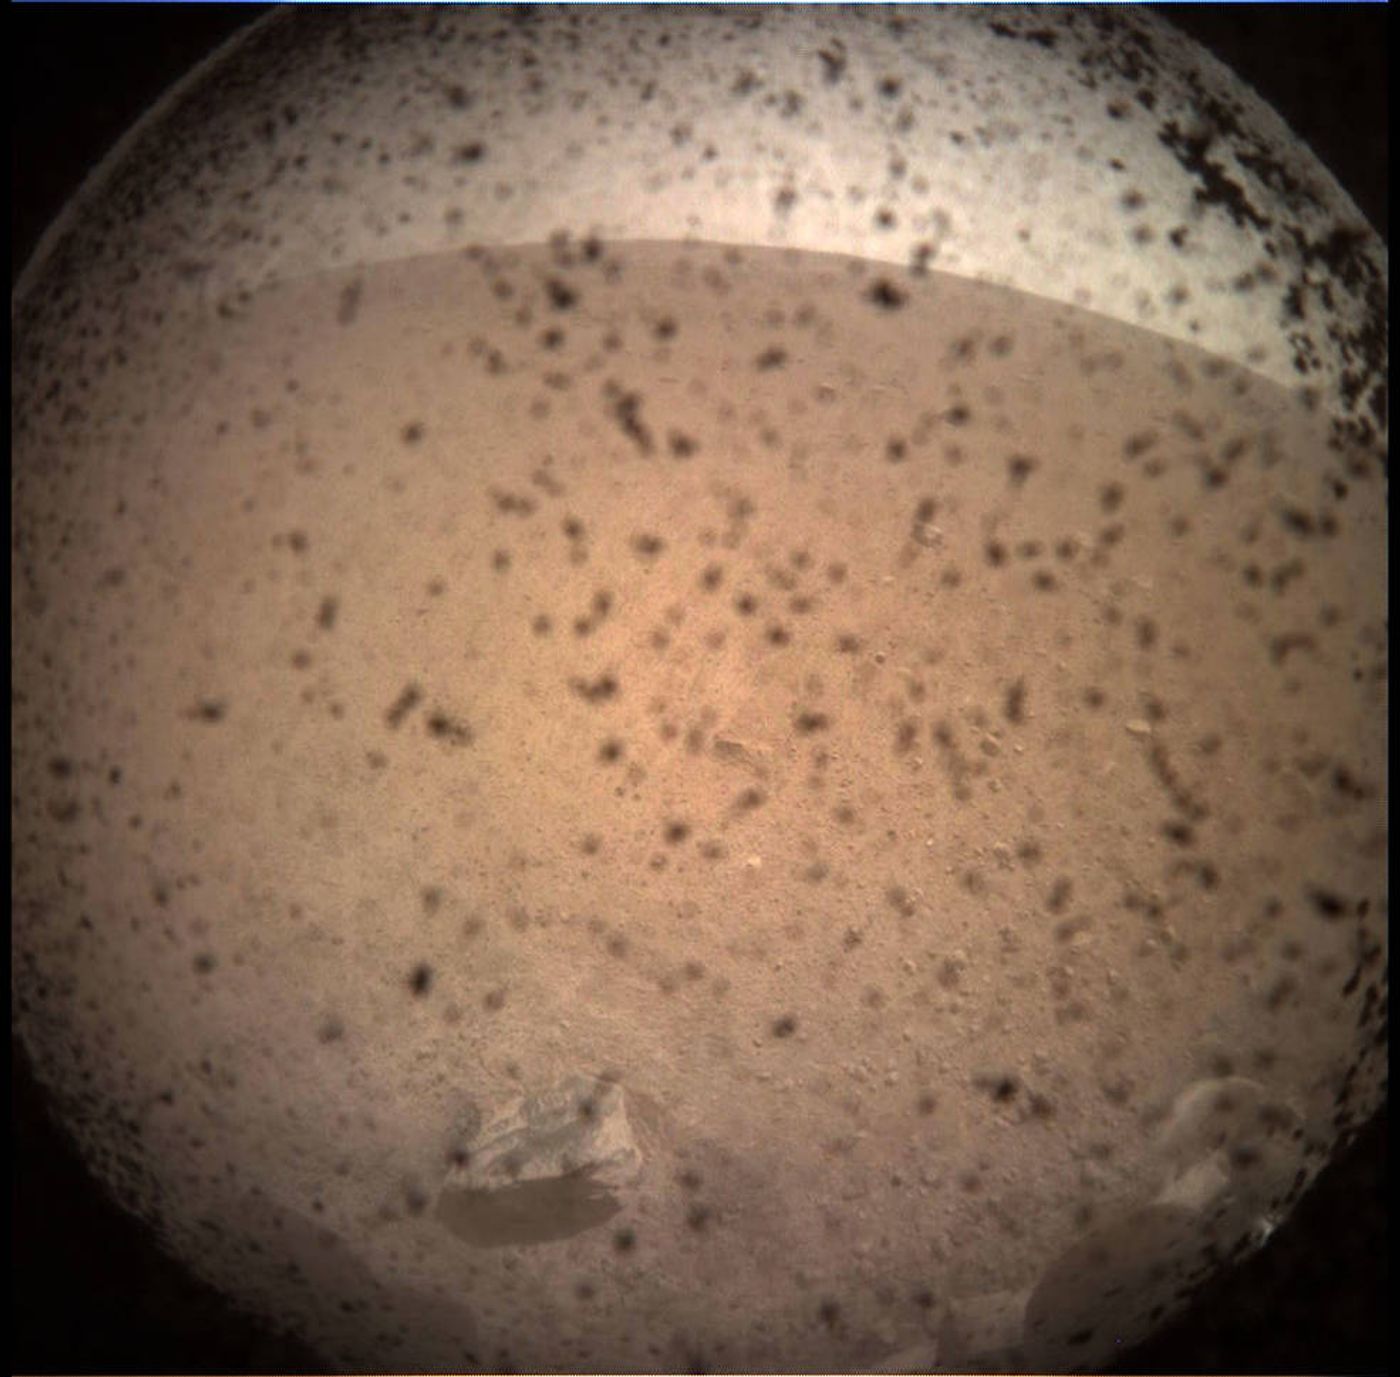 An image of Mars captured with InSight's onboard camera system before landing.